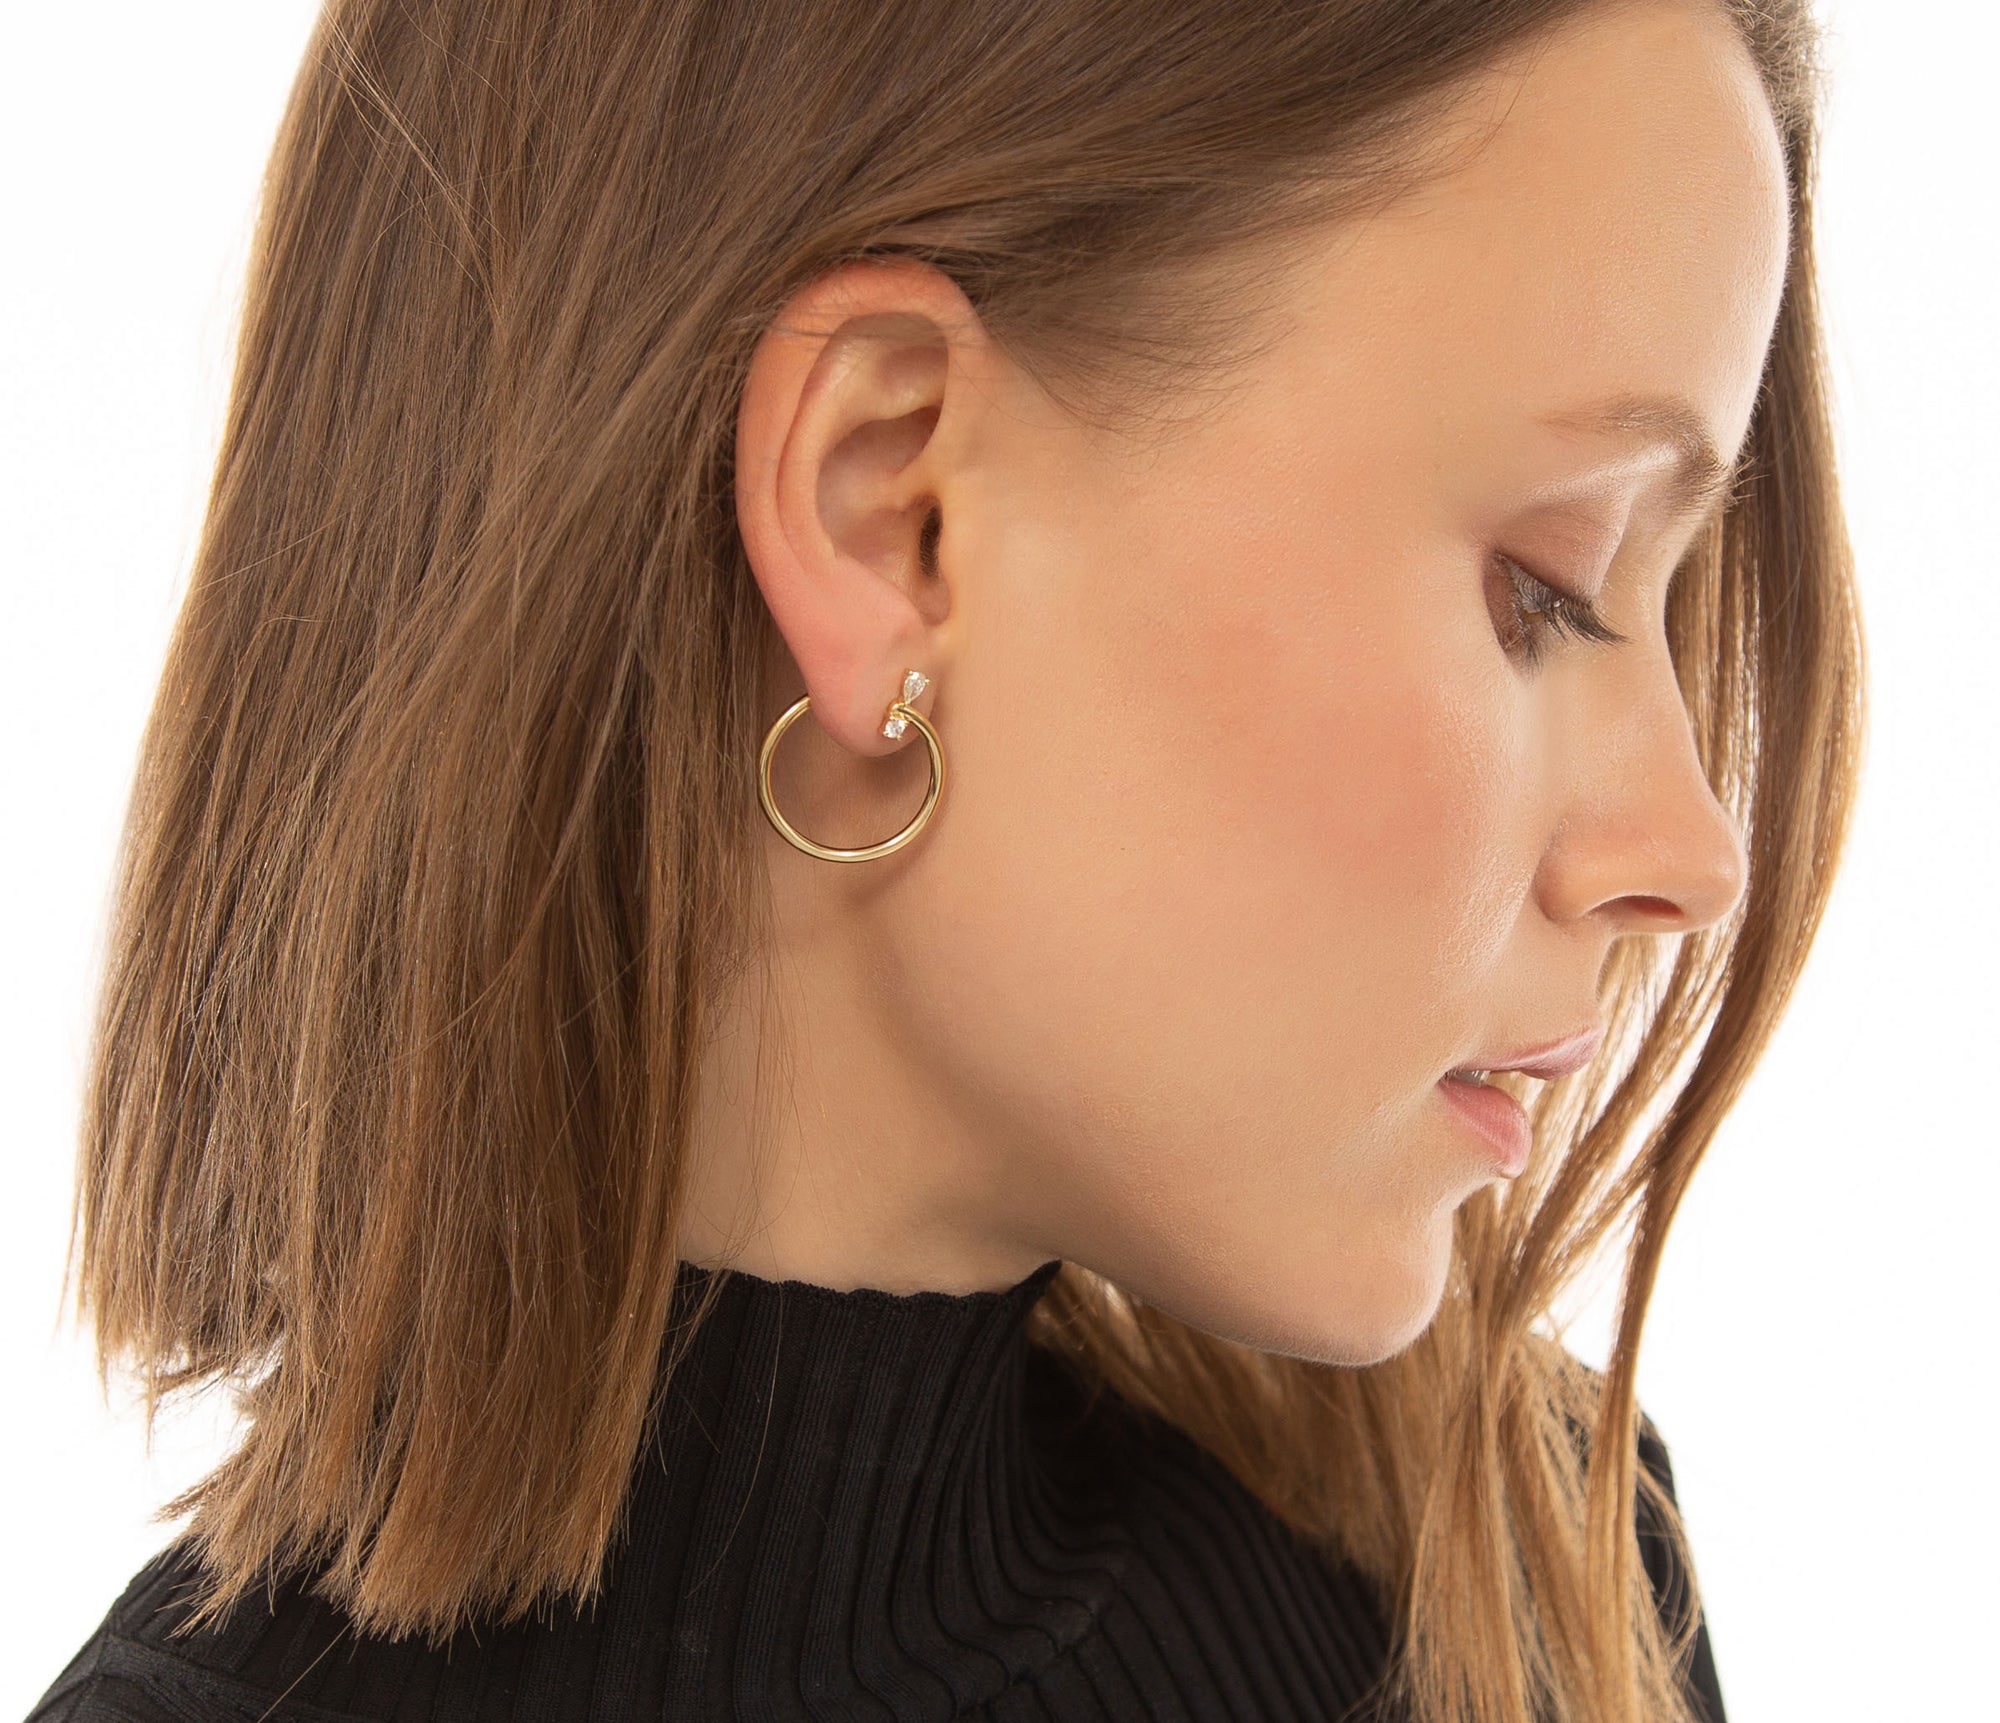 Earrings to Empower